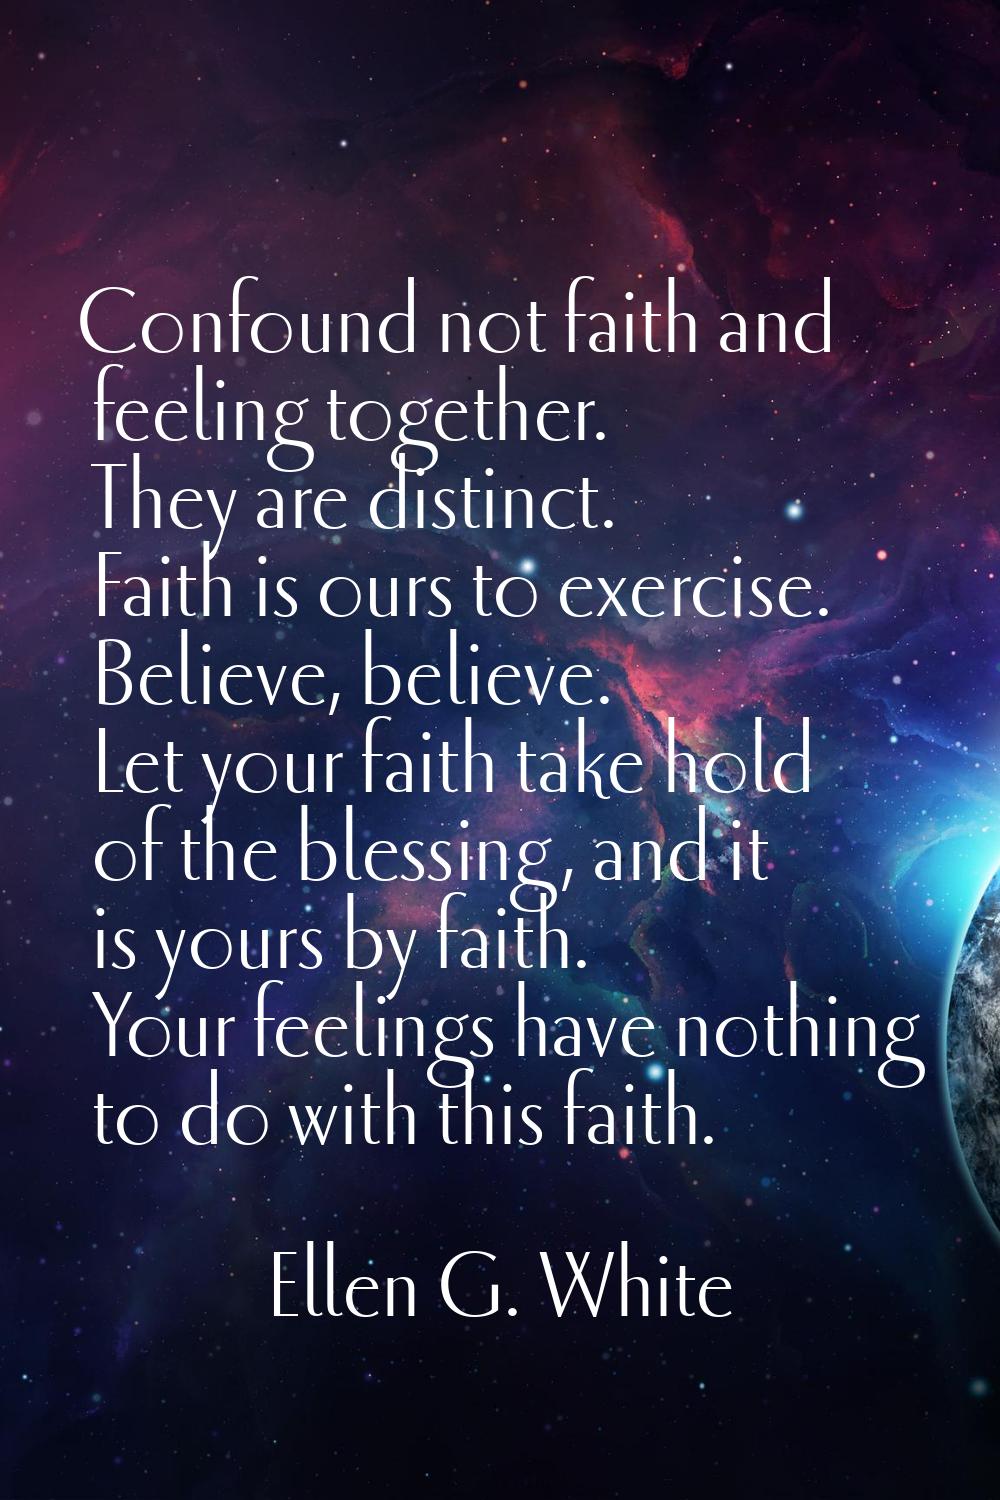 Confound not faith and feeling together. They are distinct. Faith is ours to exercise. Believe, bel